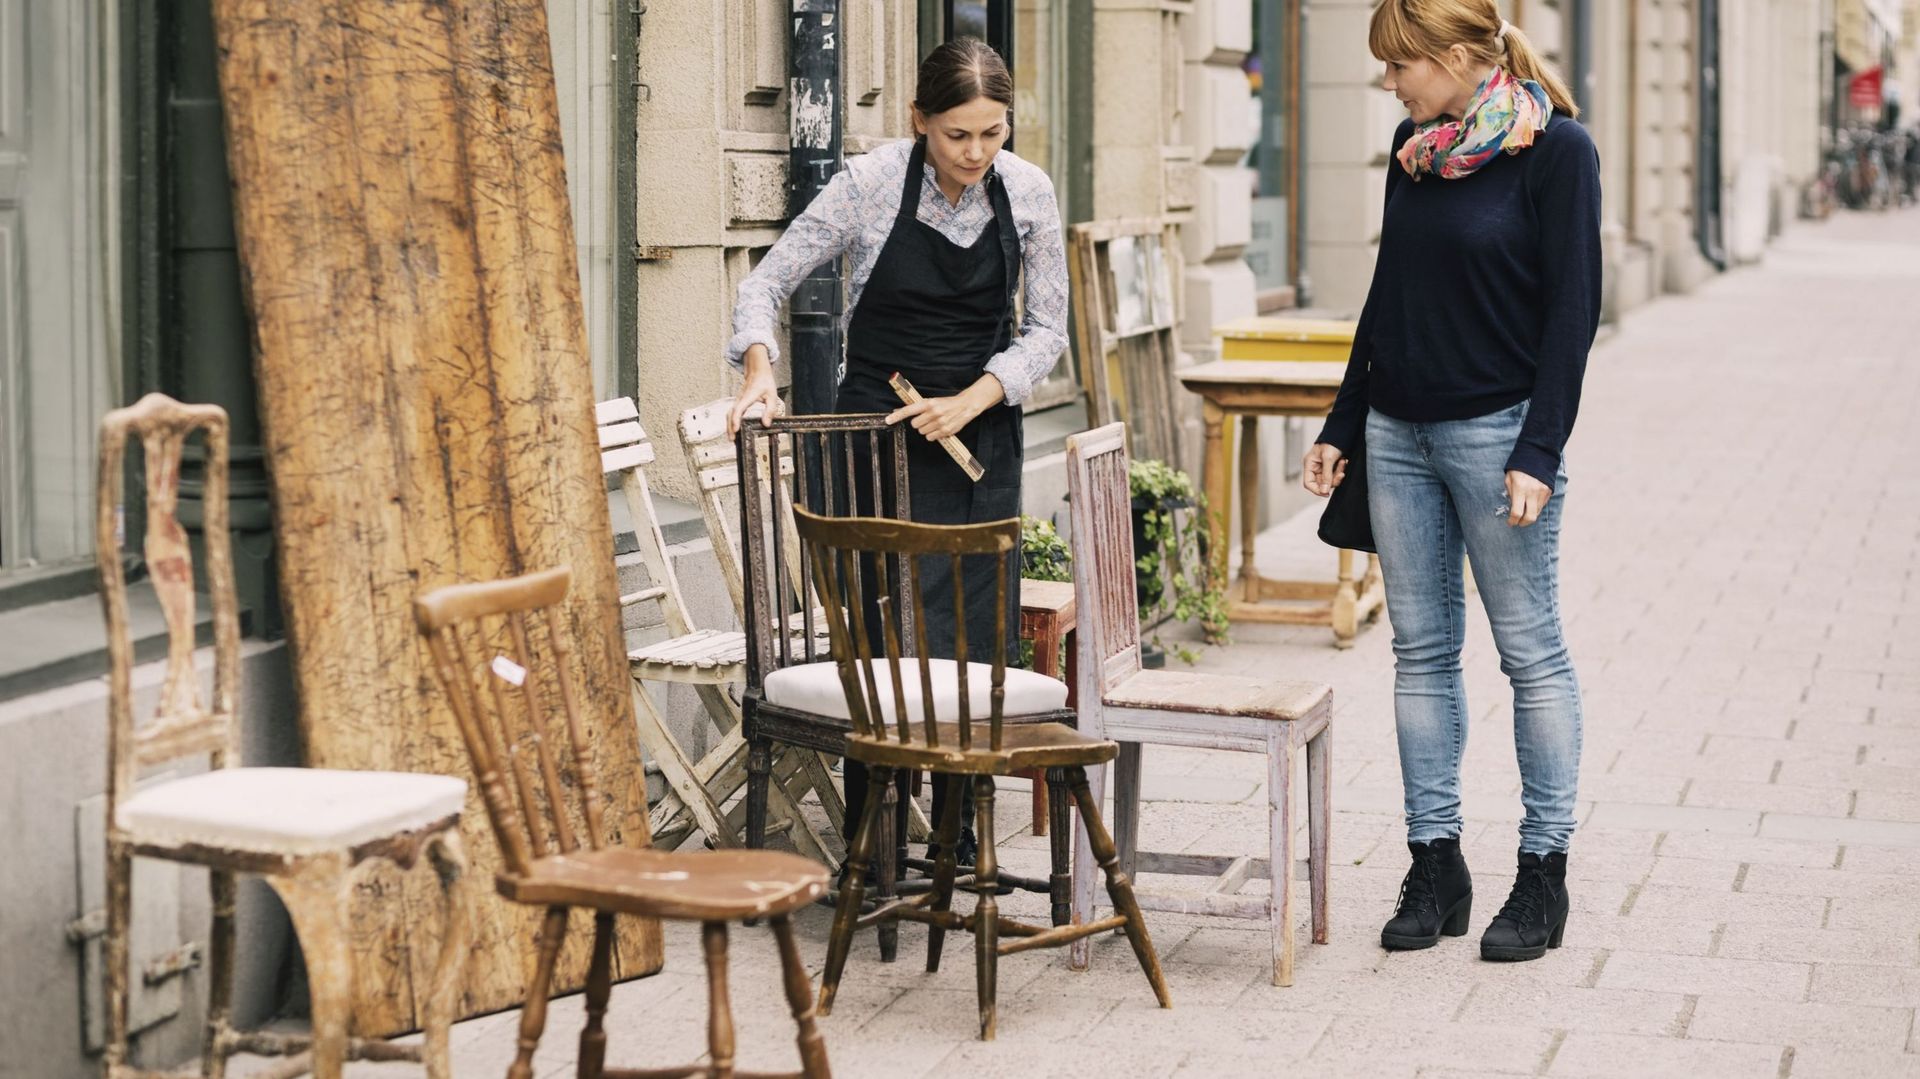 Female retailer showing antique chair to customer outside antique shop